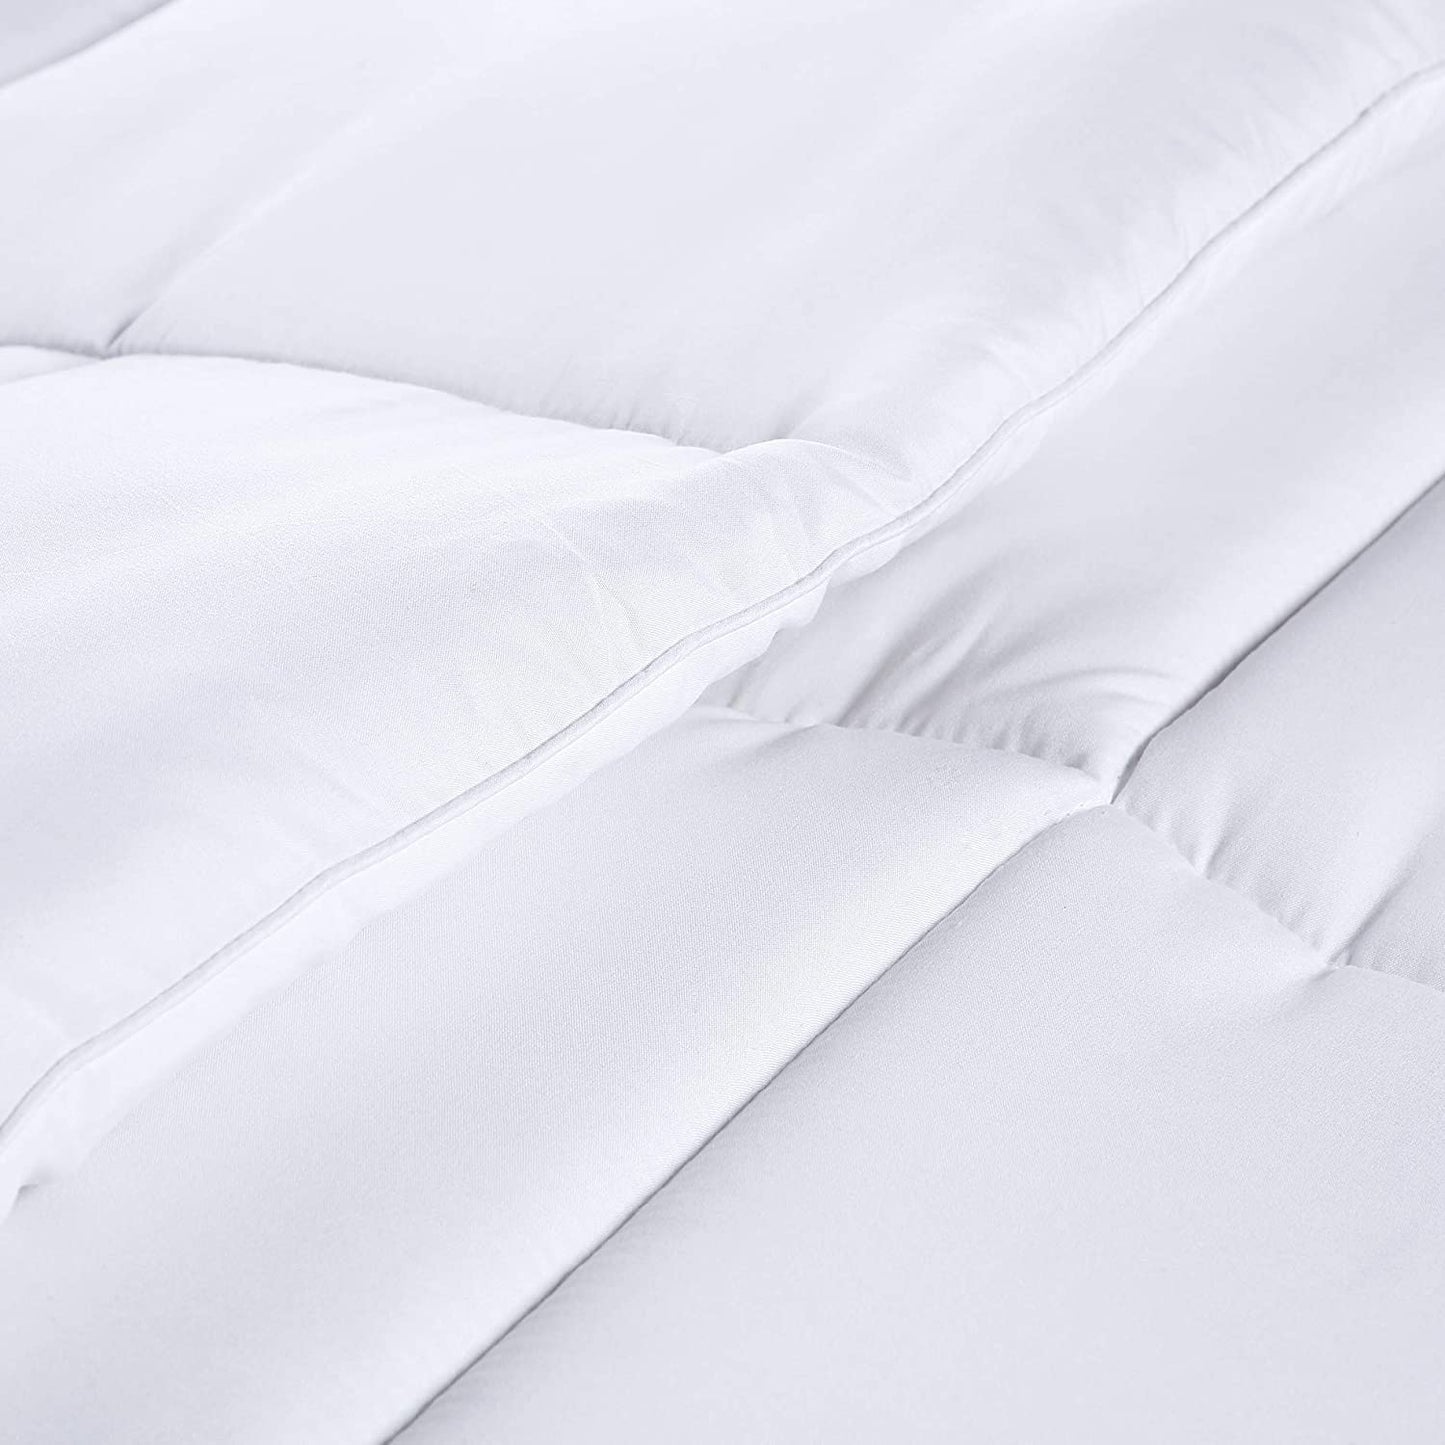 Quilted Comforter Duvet Insert - Box Stitched Down Alternative with Corner Tabs - Available in Various Colors